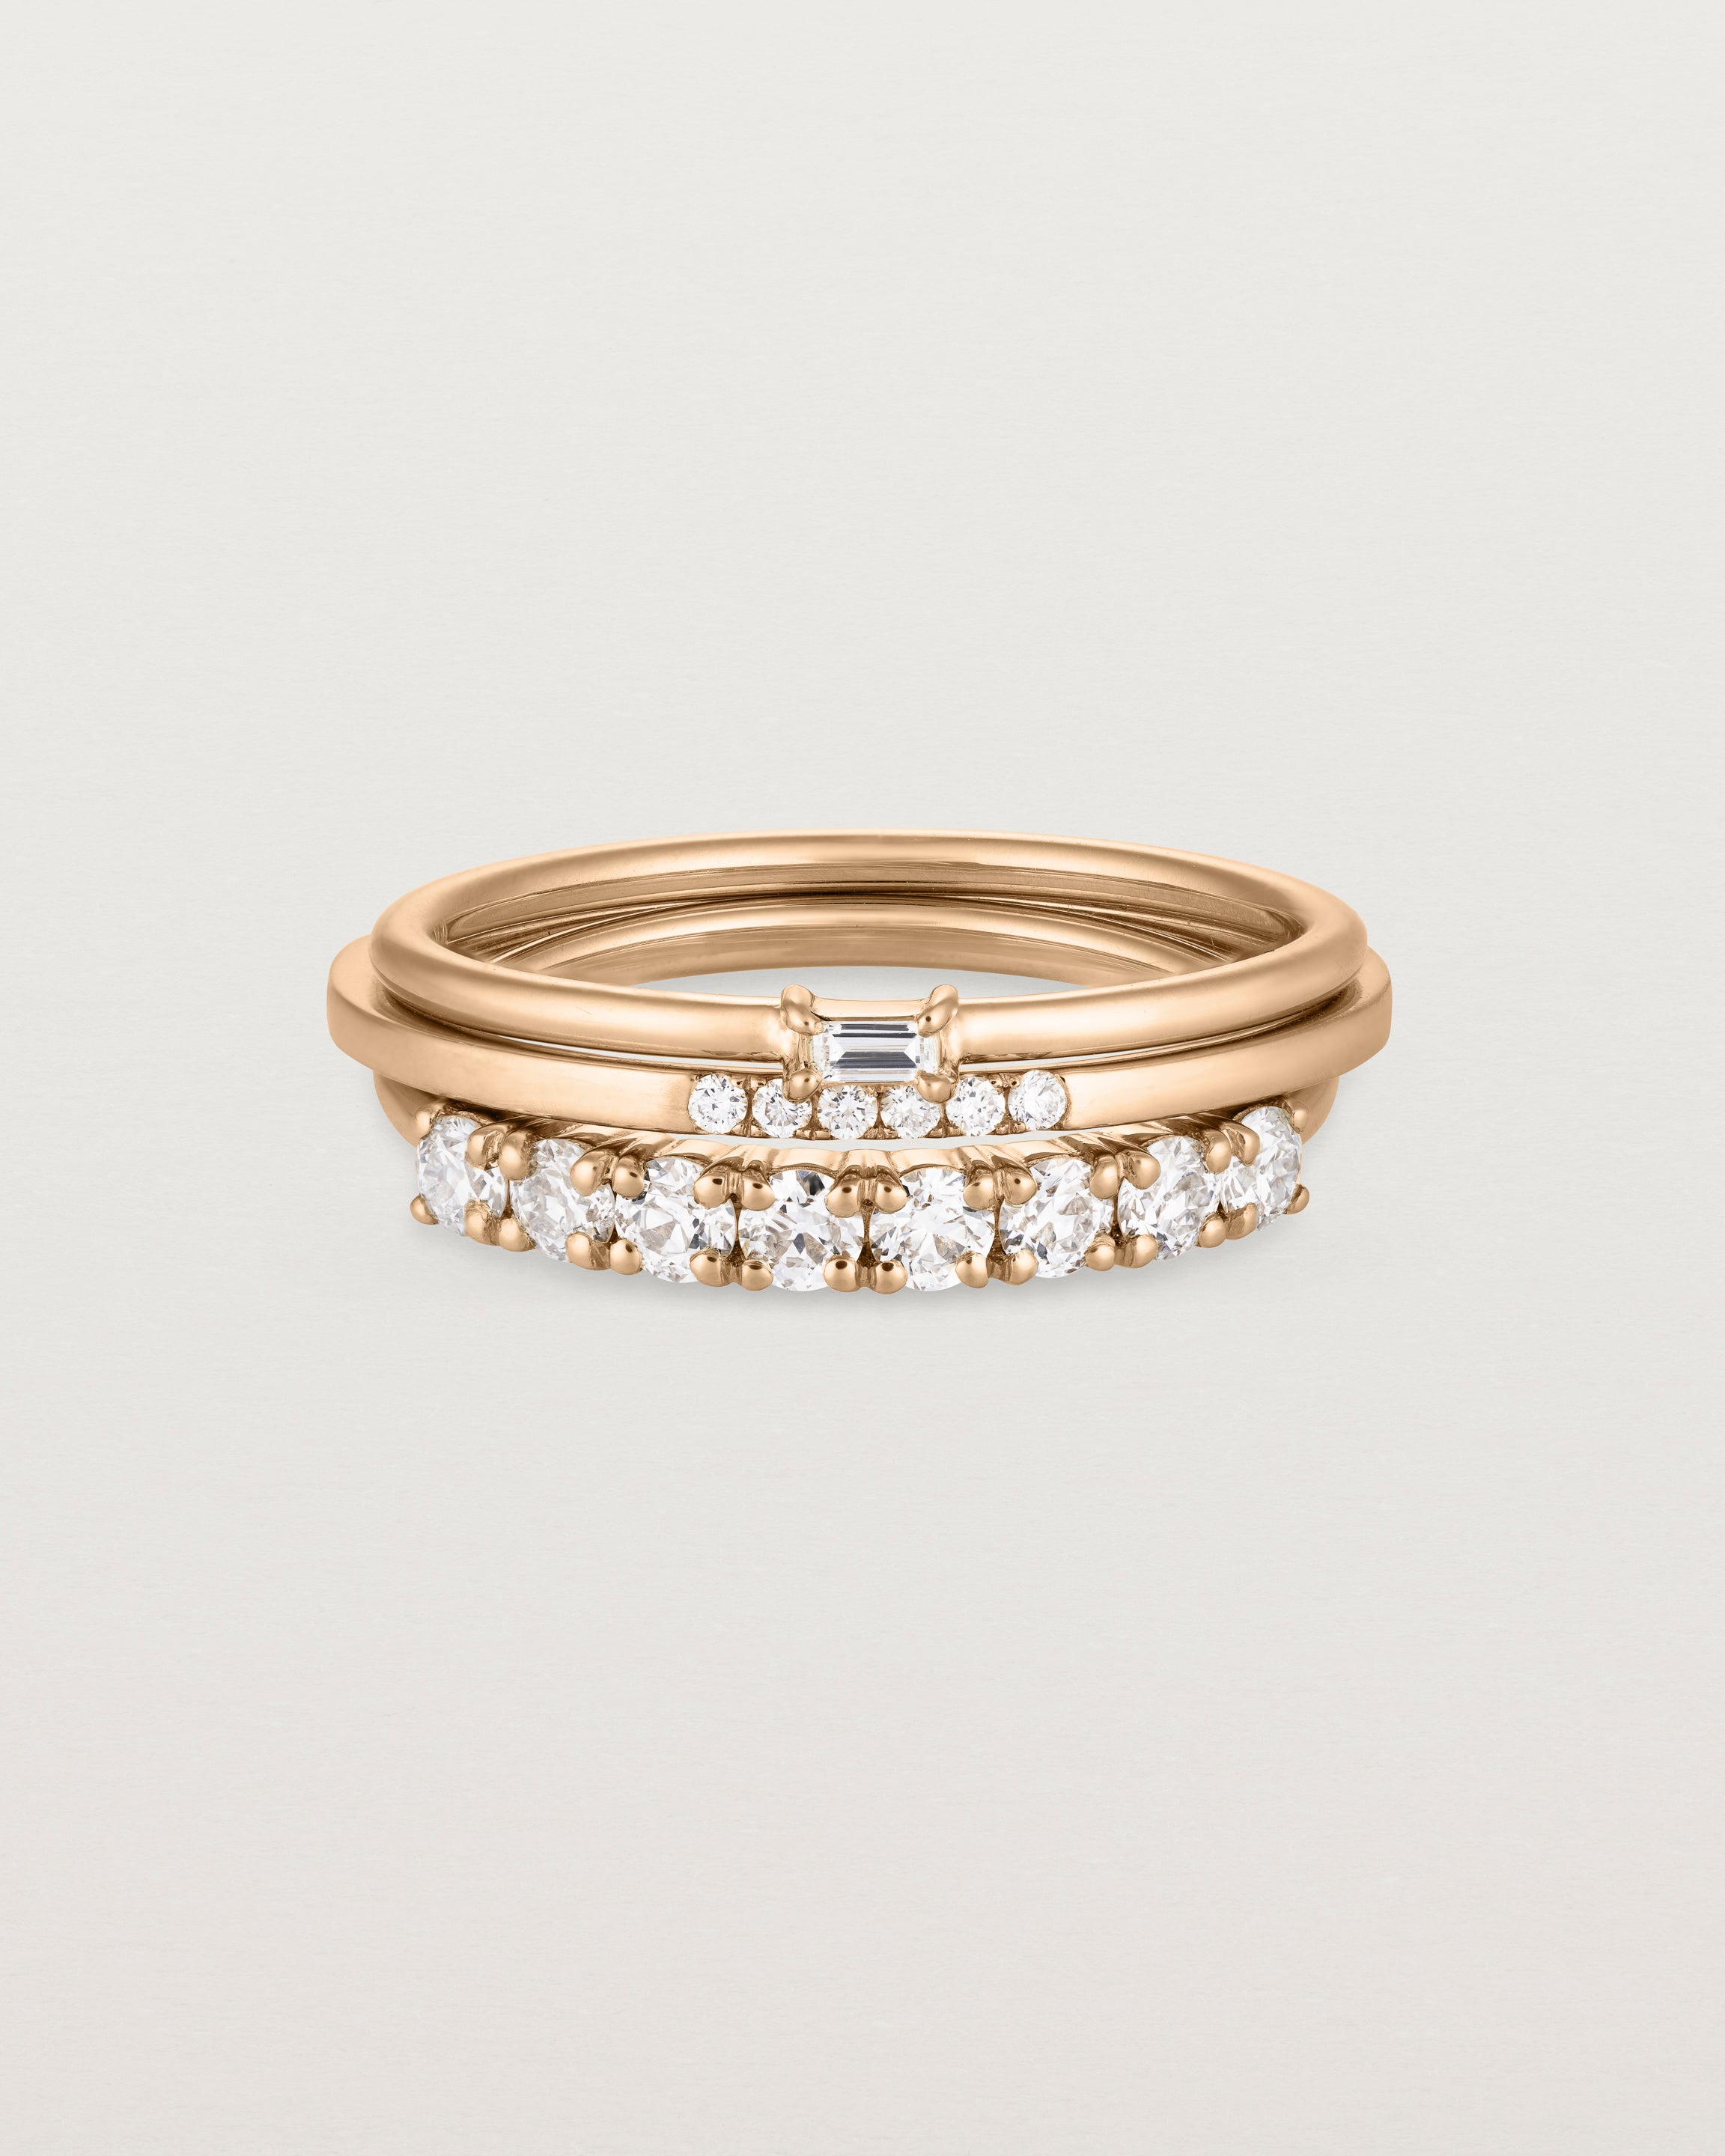 A set of three rose gold bands, one featuring white round diamonds, one size white diamonds and one featuring a white emerald cut diamond